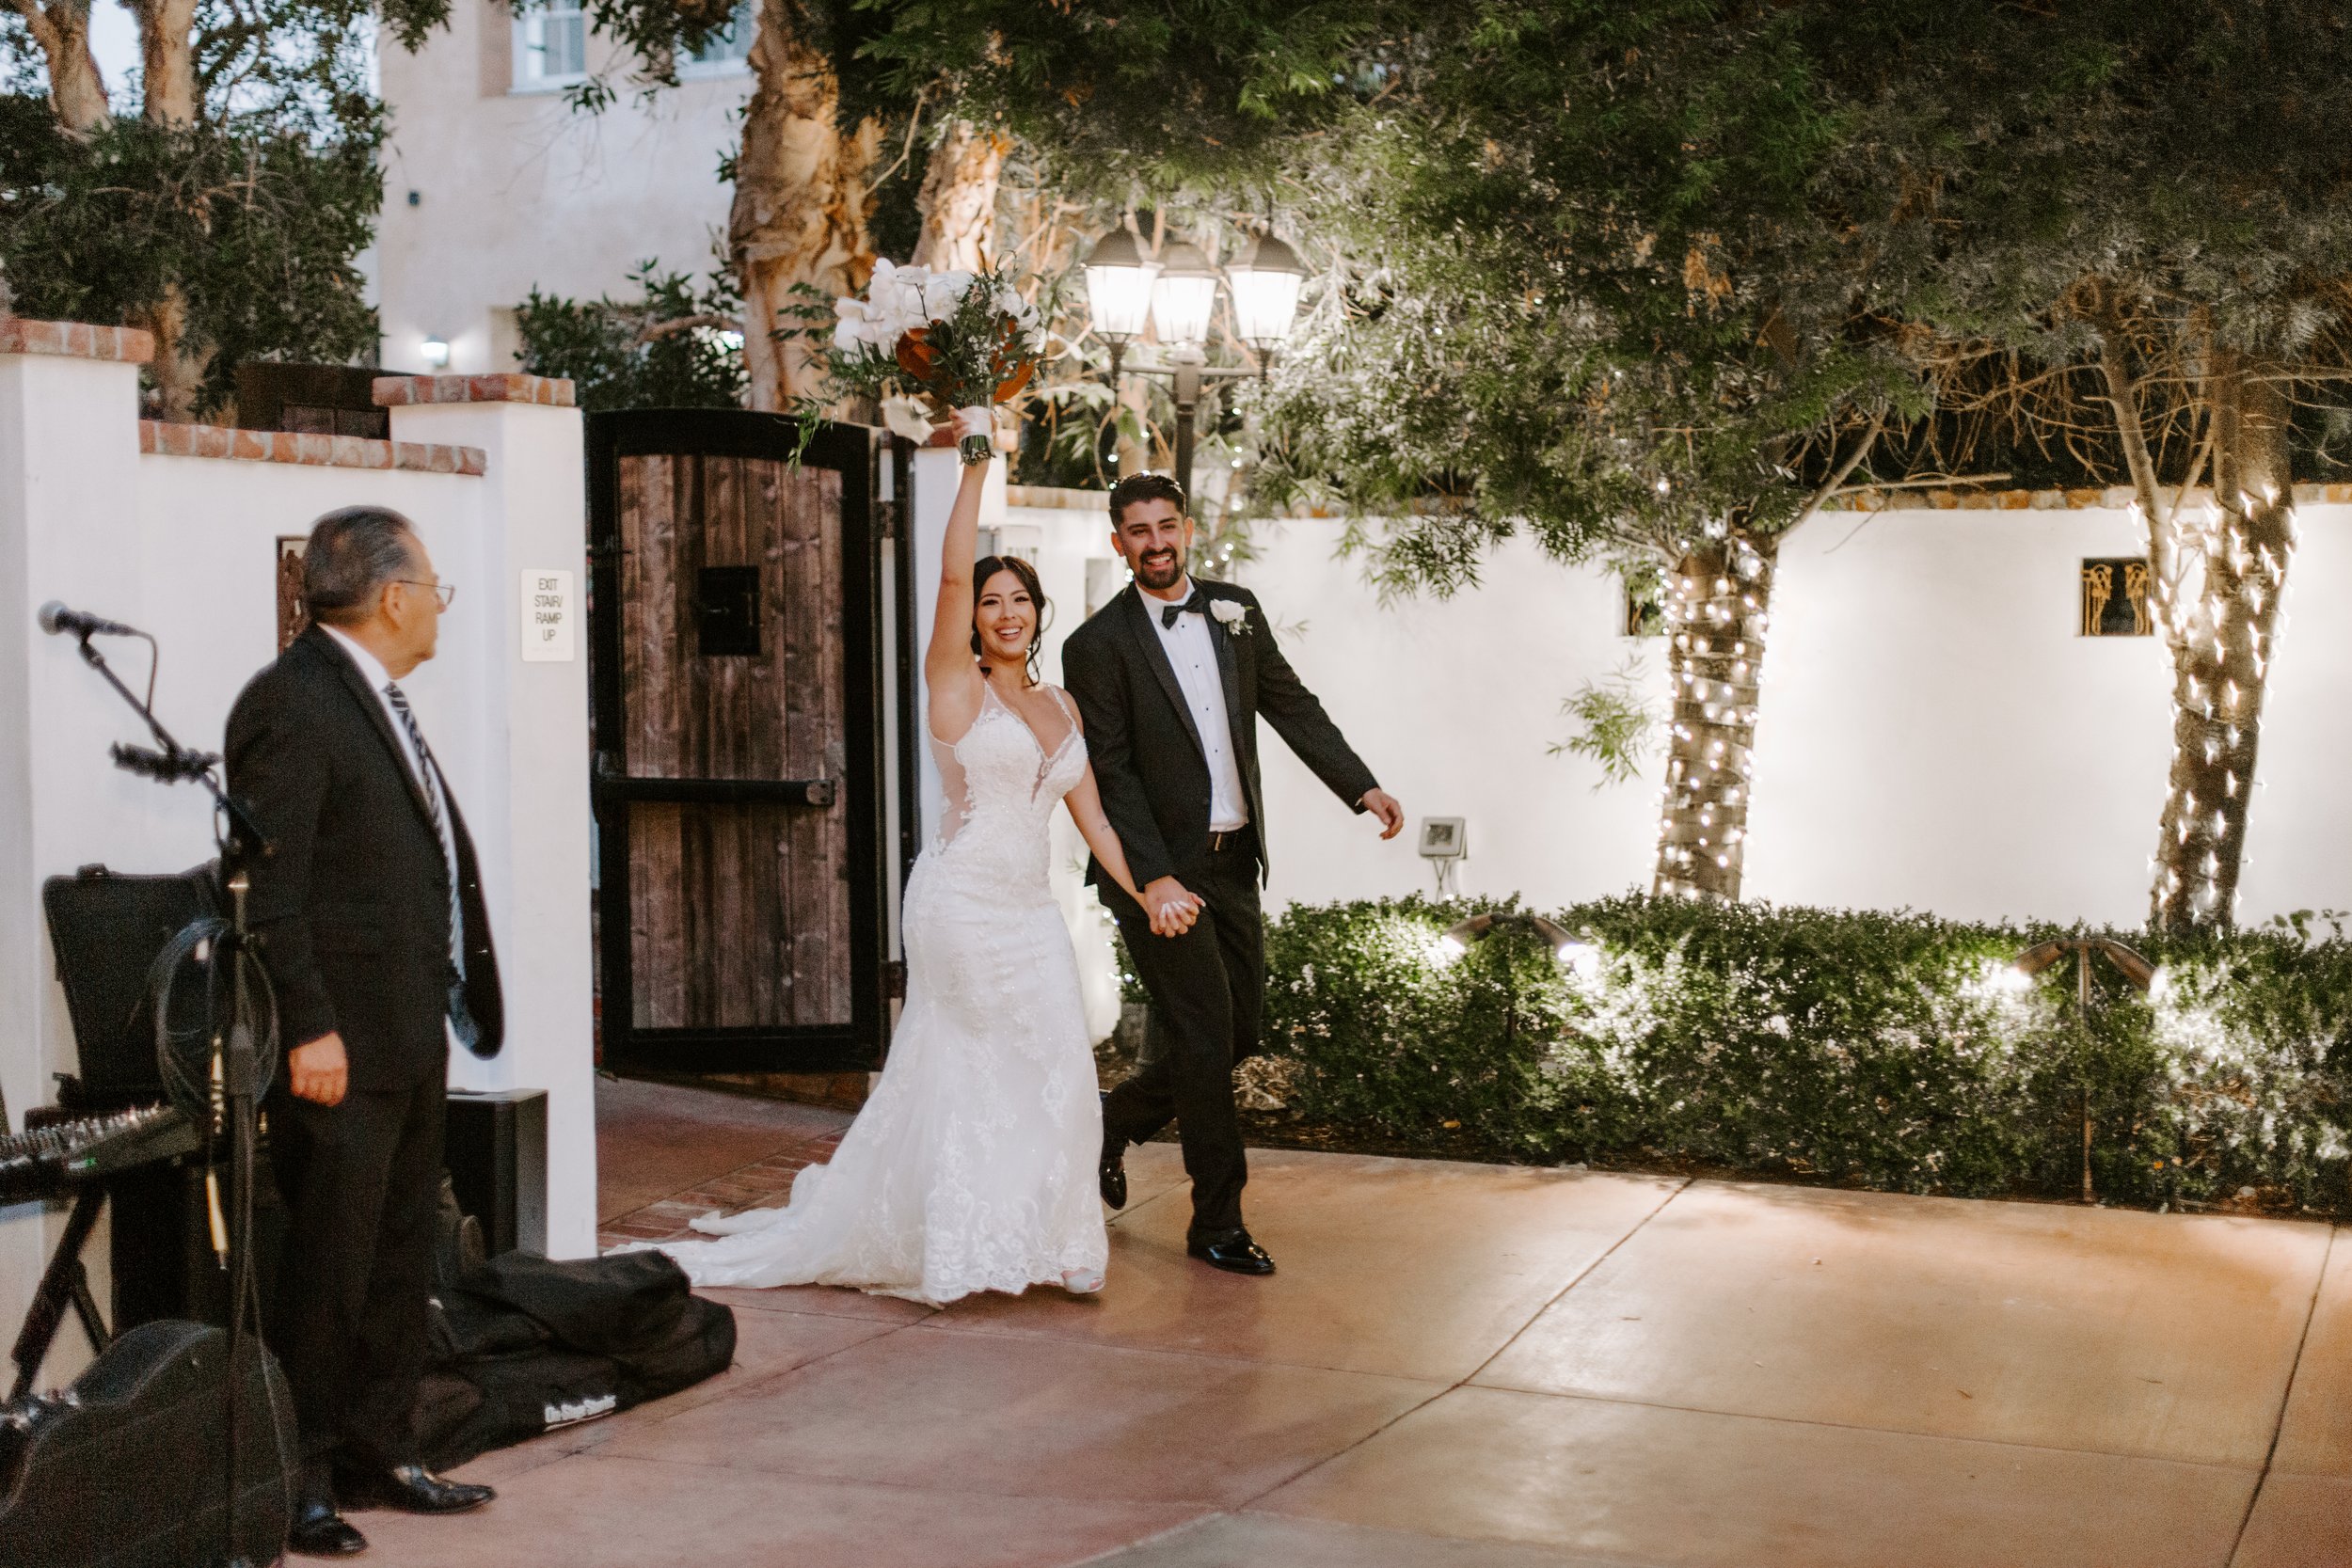 Ashley and Andrew Wedding at the San Juan Capistrano Mission and the Franciscan Gardens by Kara Reynolds Photography629.jpg